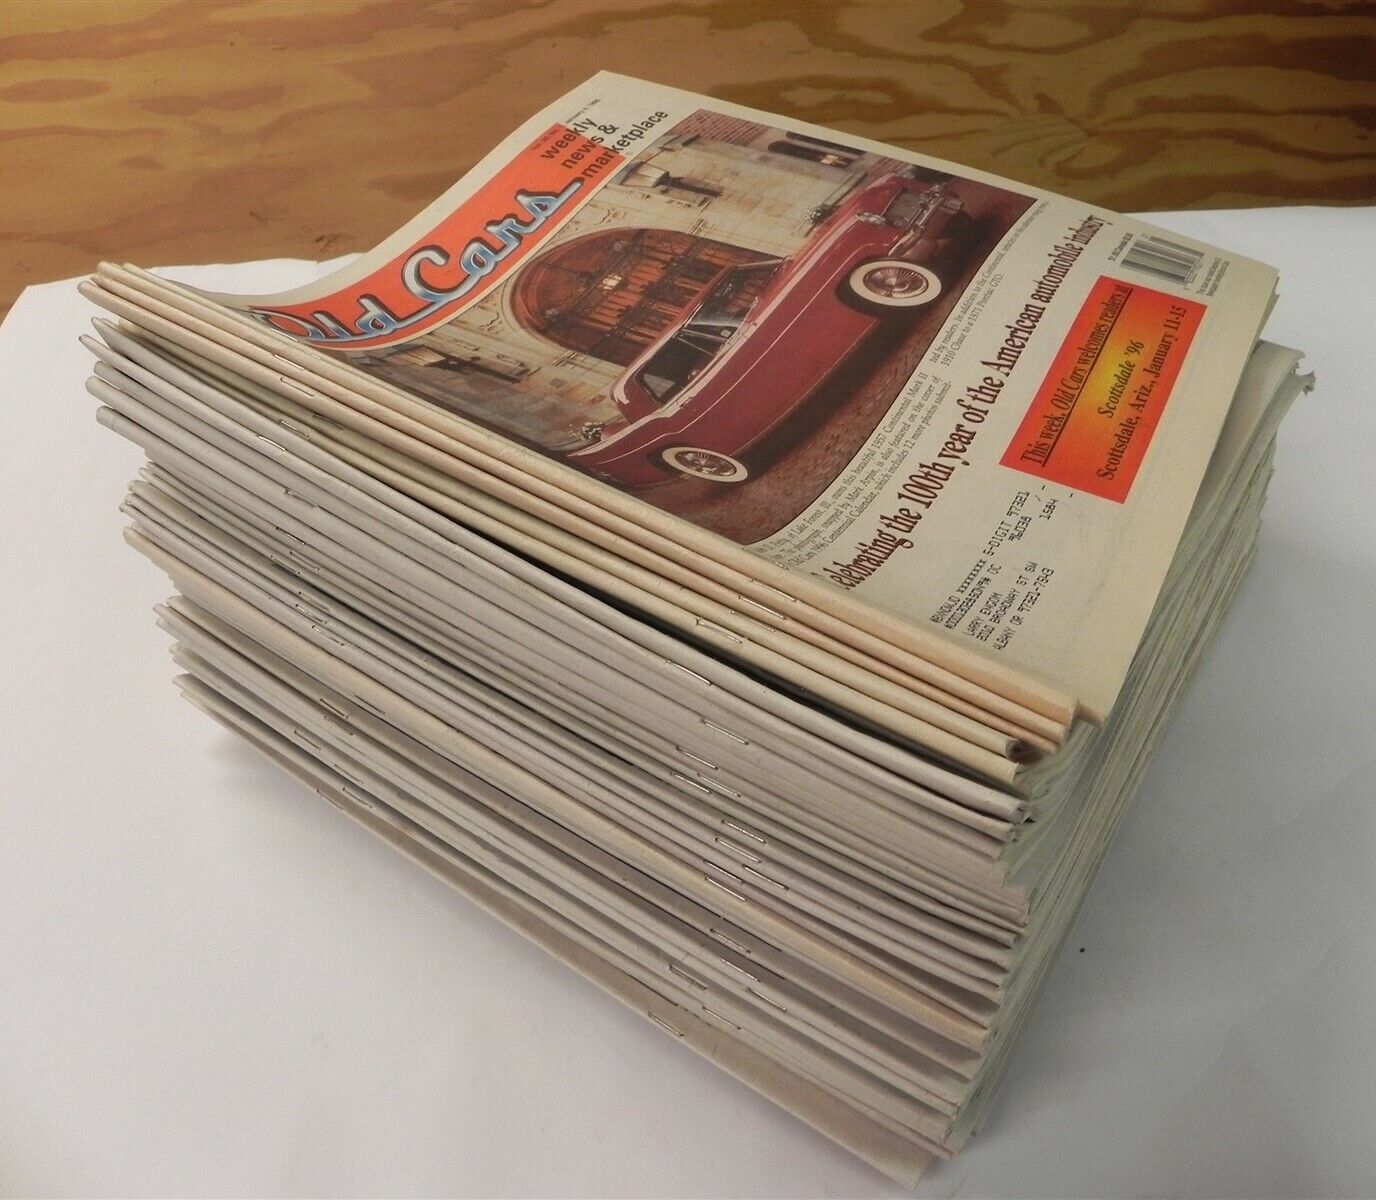 OLD CARS WEEKLY NEWSPAPER | 1996 ALMOST COMPLETE YEAR -IN GOOD CONDITION- 